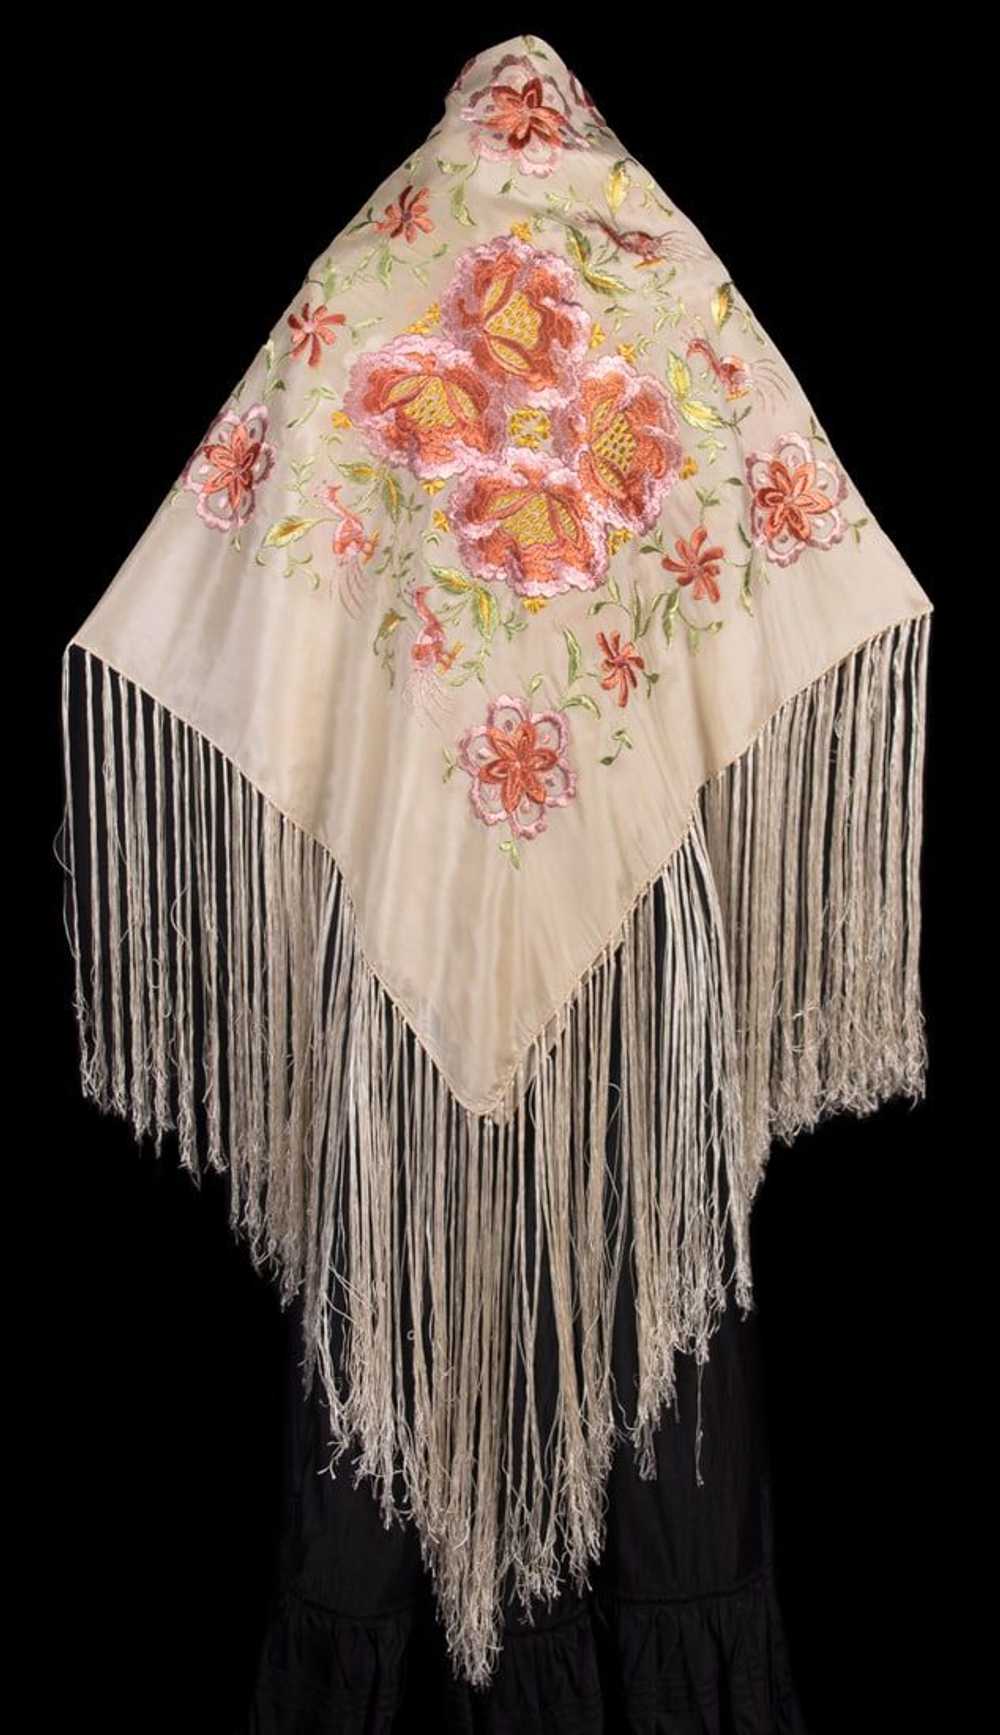 TWO CANTON SHAWLS, 1930s - image 8